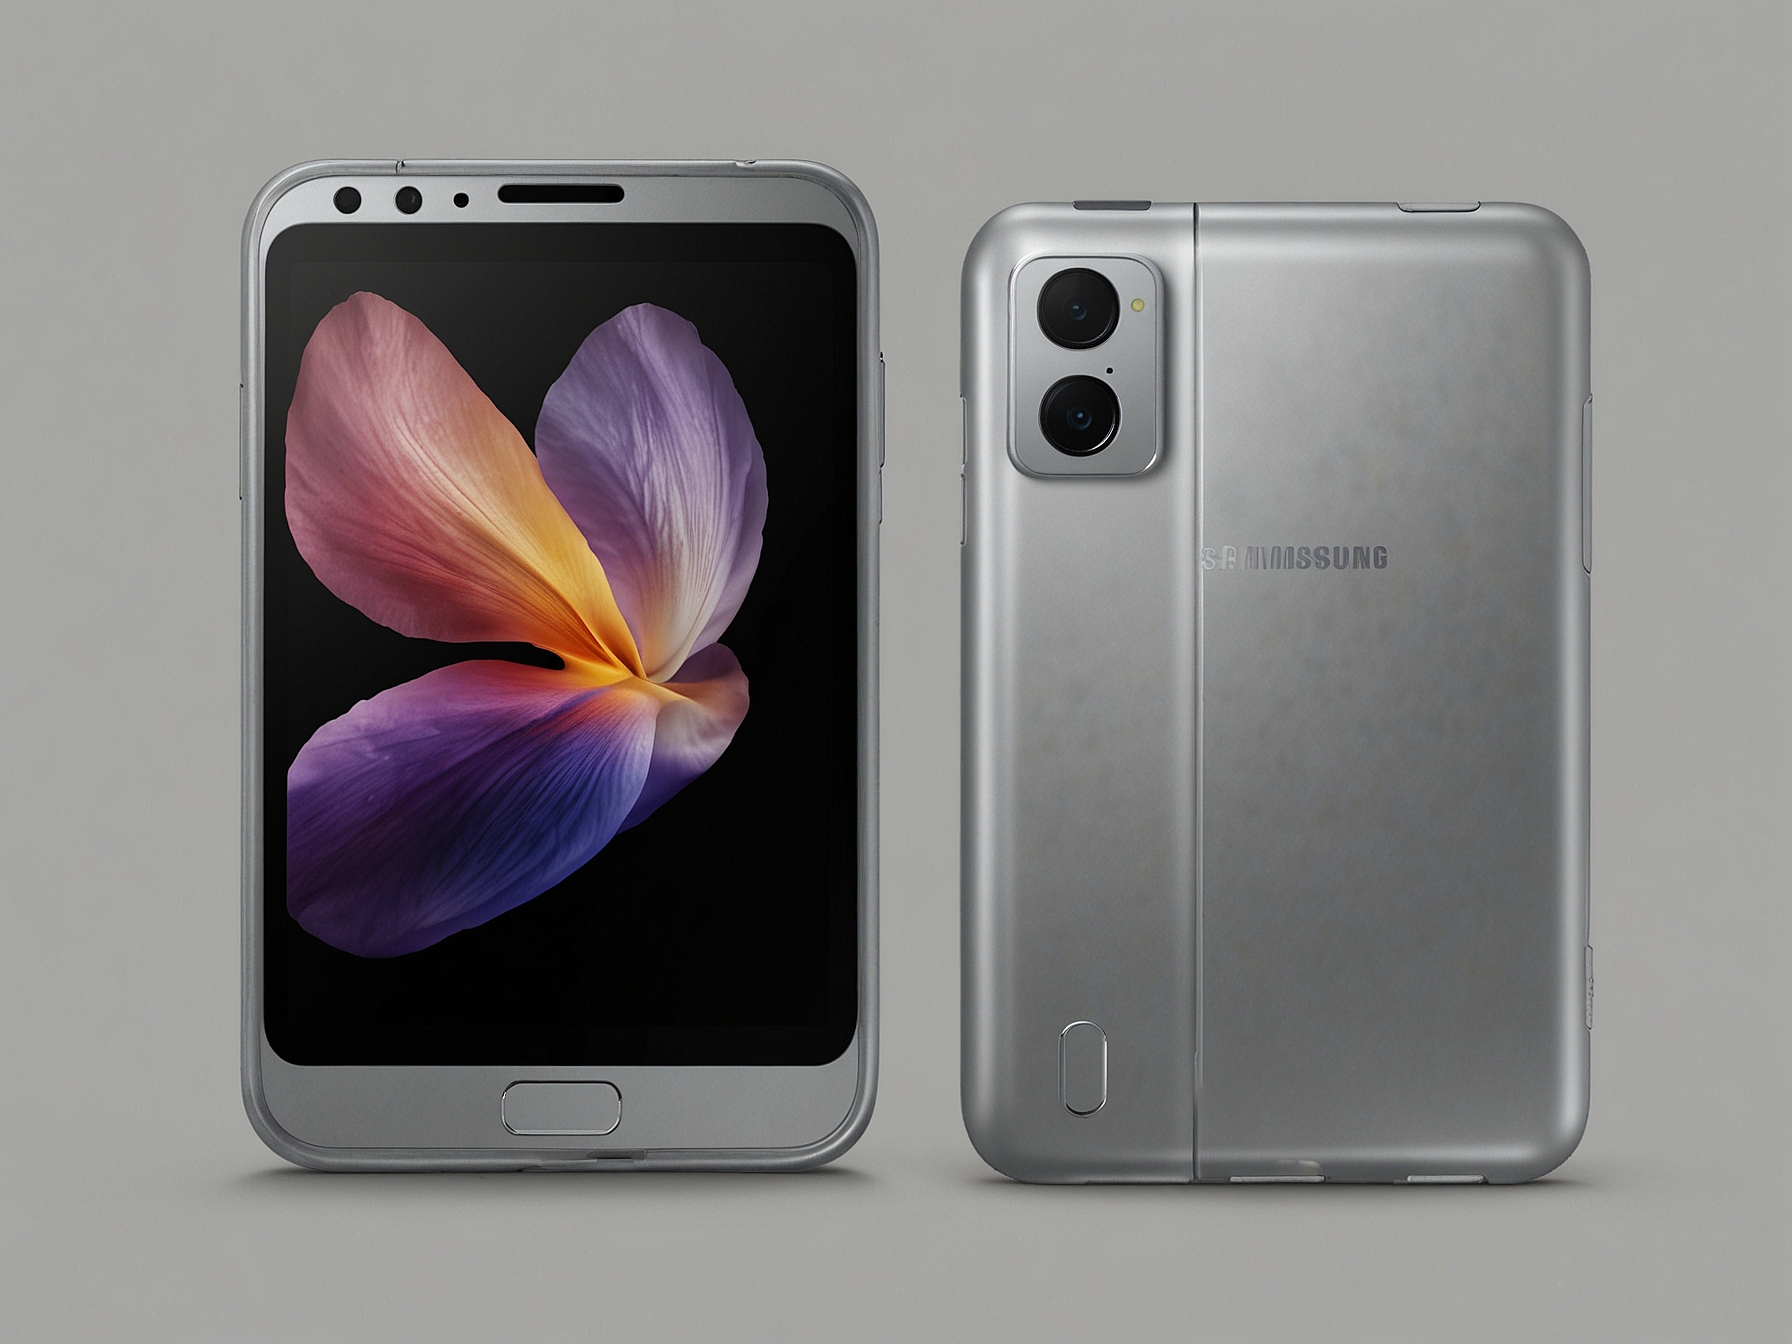 The render of Samsung Galaxy Z Flip 6 showcases a sleek design with a larger 3.9-inch cover display in a stylish silver finish, indicating a significant upgrade and expanded functionality over previous models.